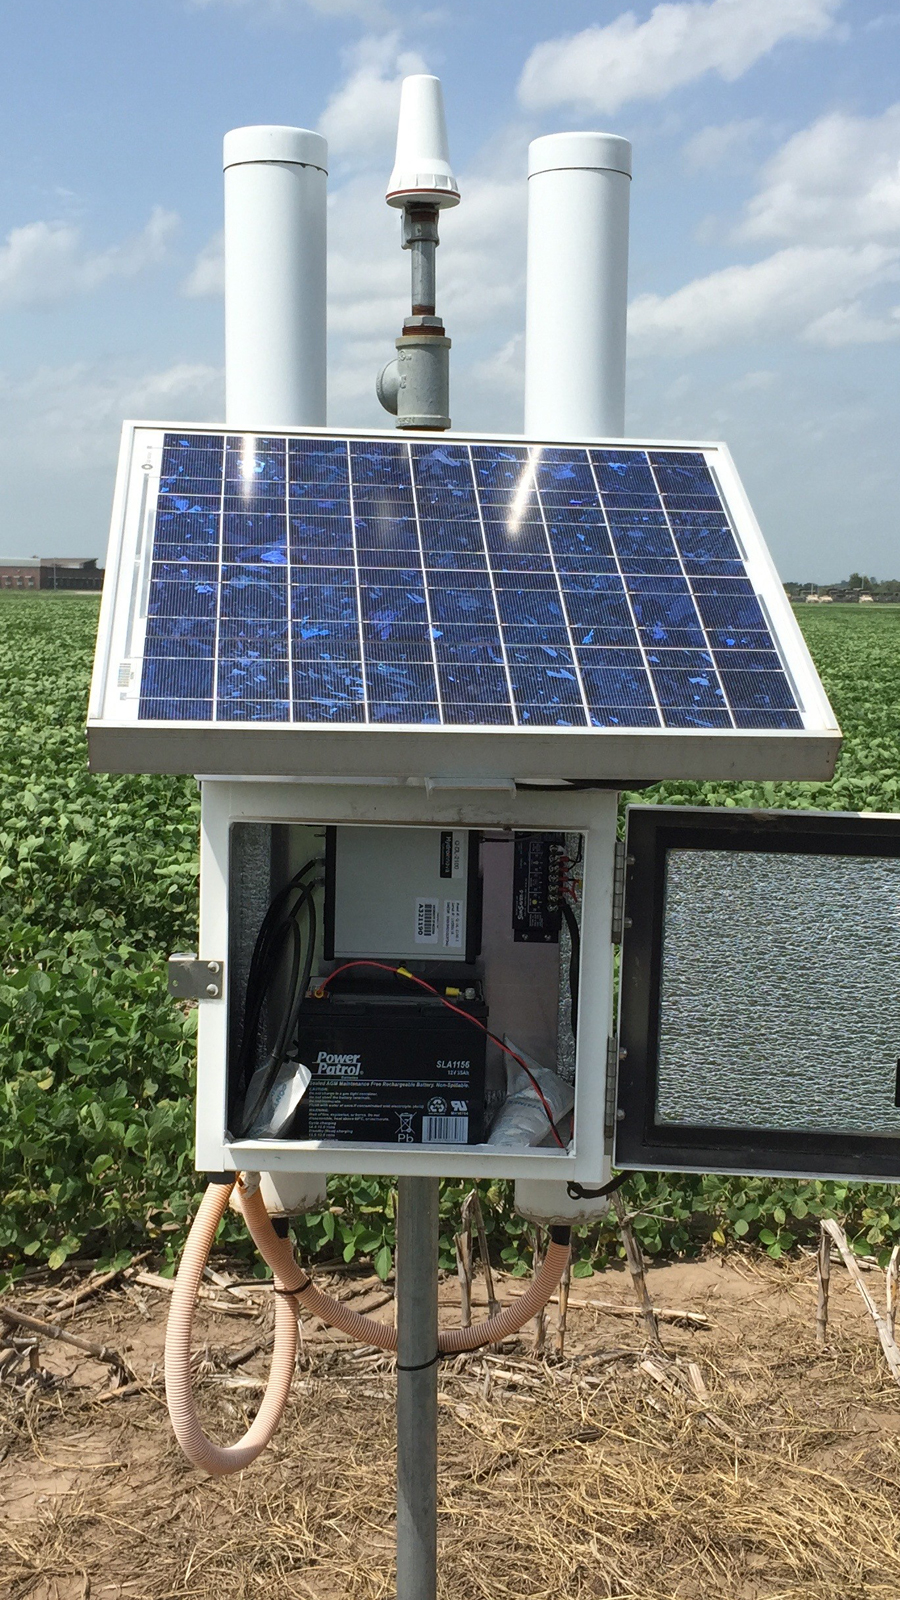 The COSMOS (COsmic-ray Soil Moisture Observing System)